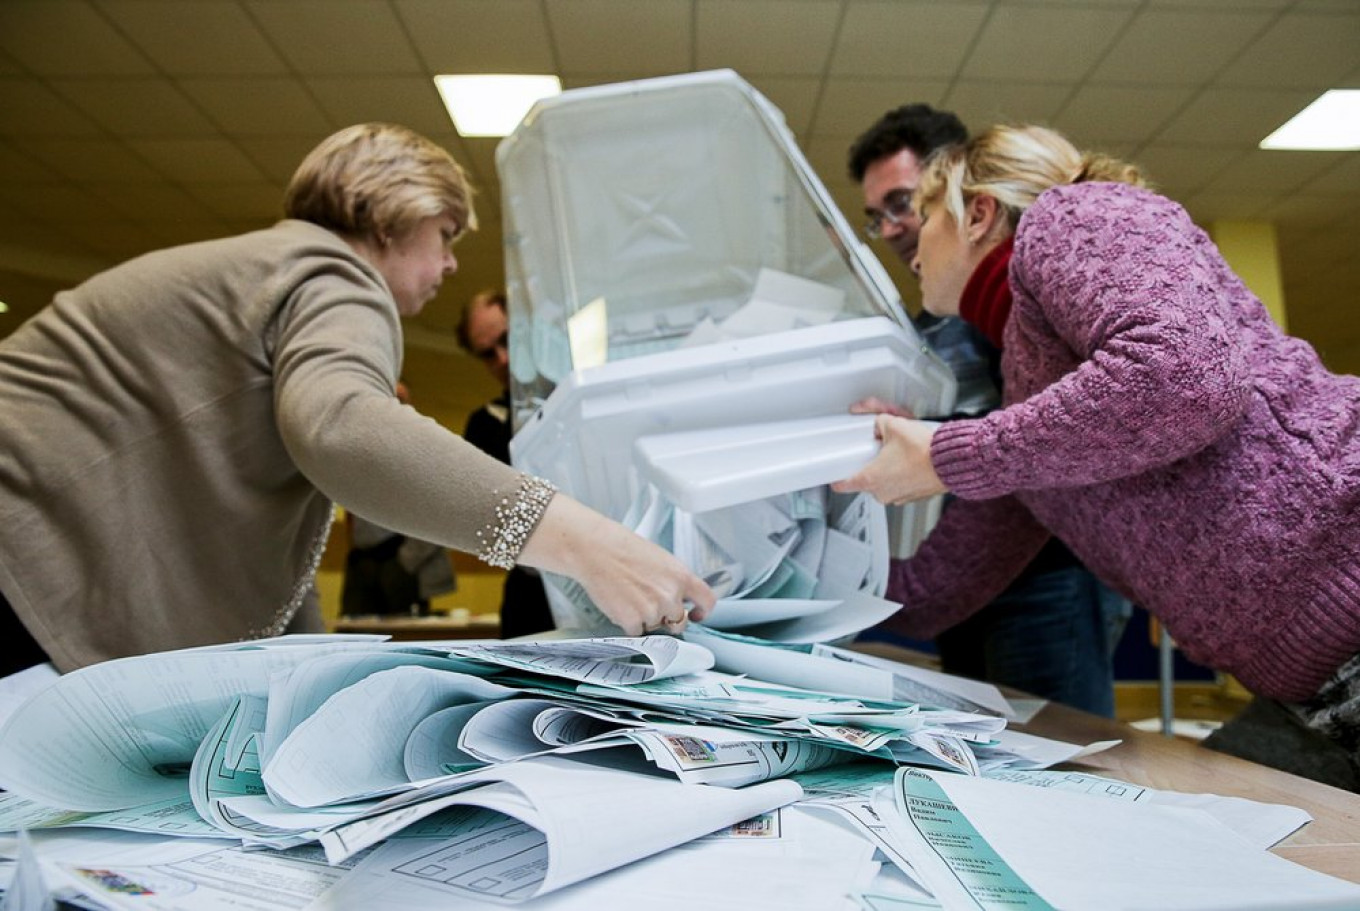 Russia to Allow Remote Voting for Putin’s Constitutional Amendments